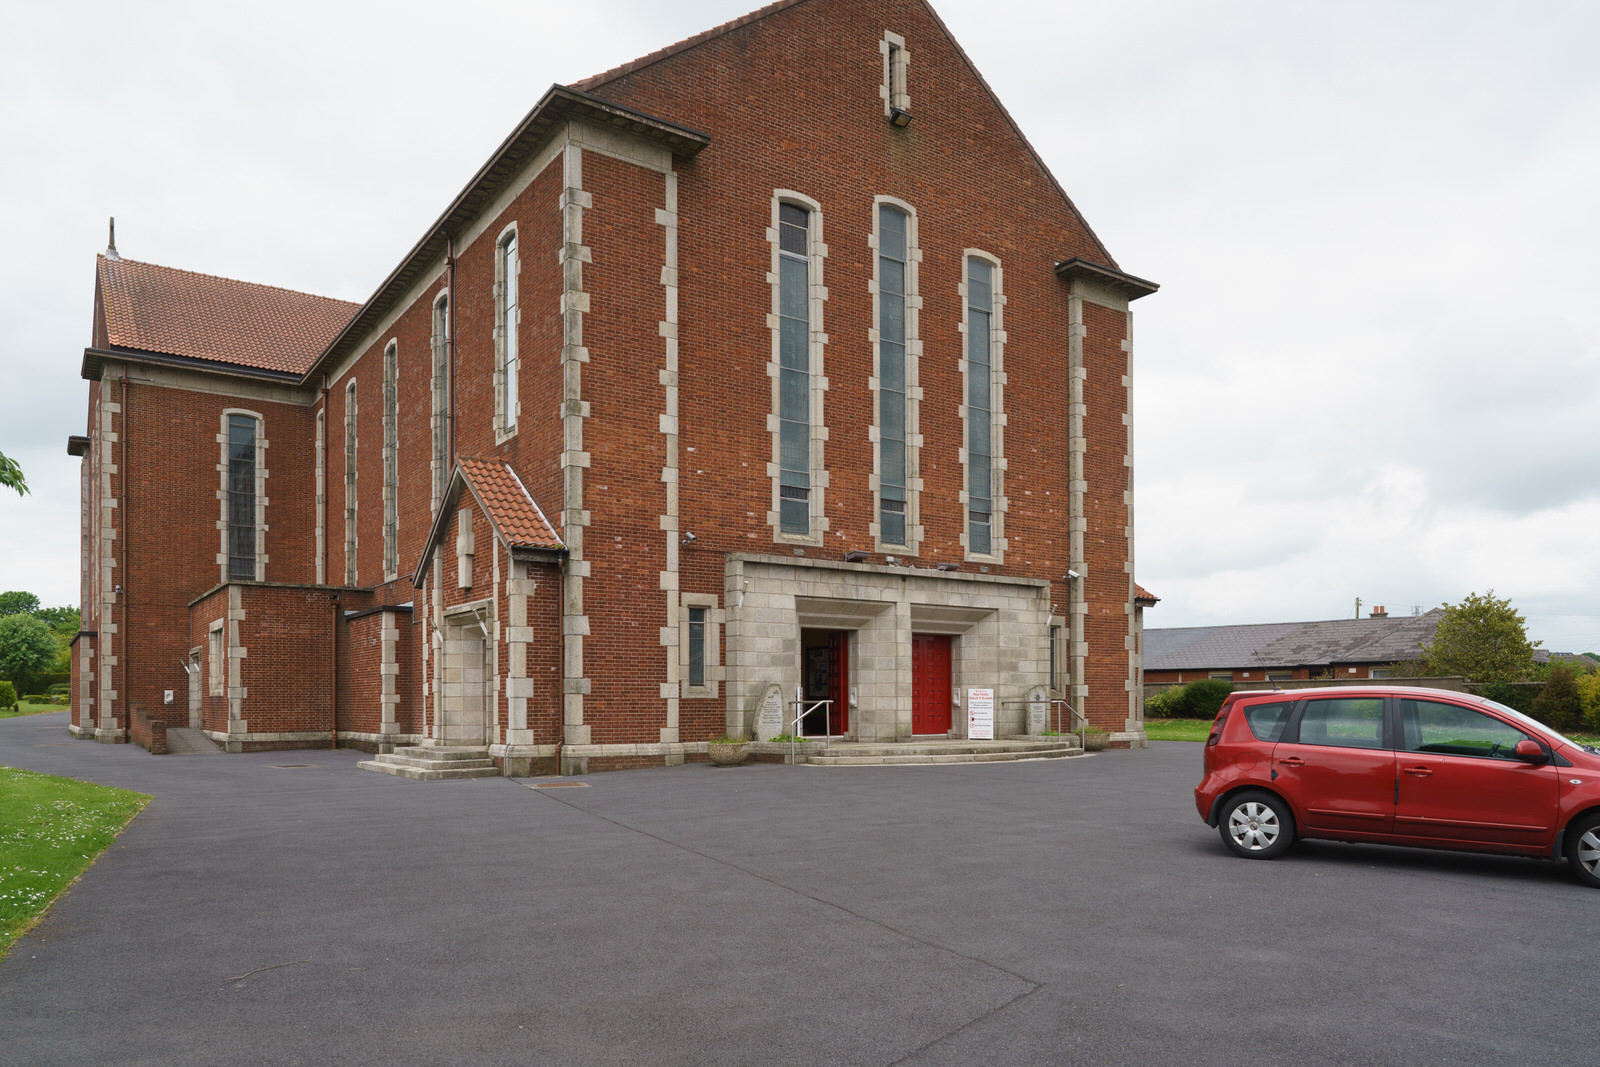 THE HOLY FAMILY PARISH CHURCH IN WATERFORD 007